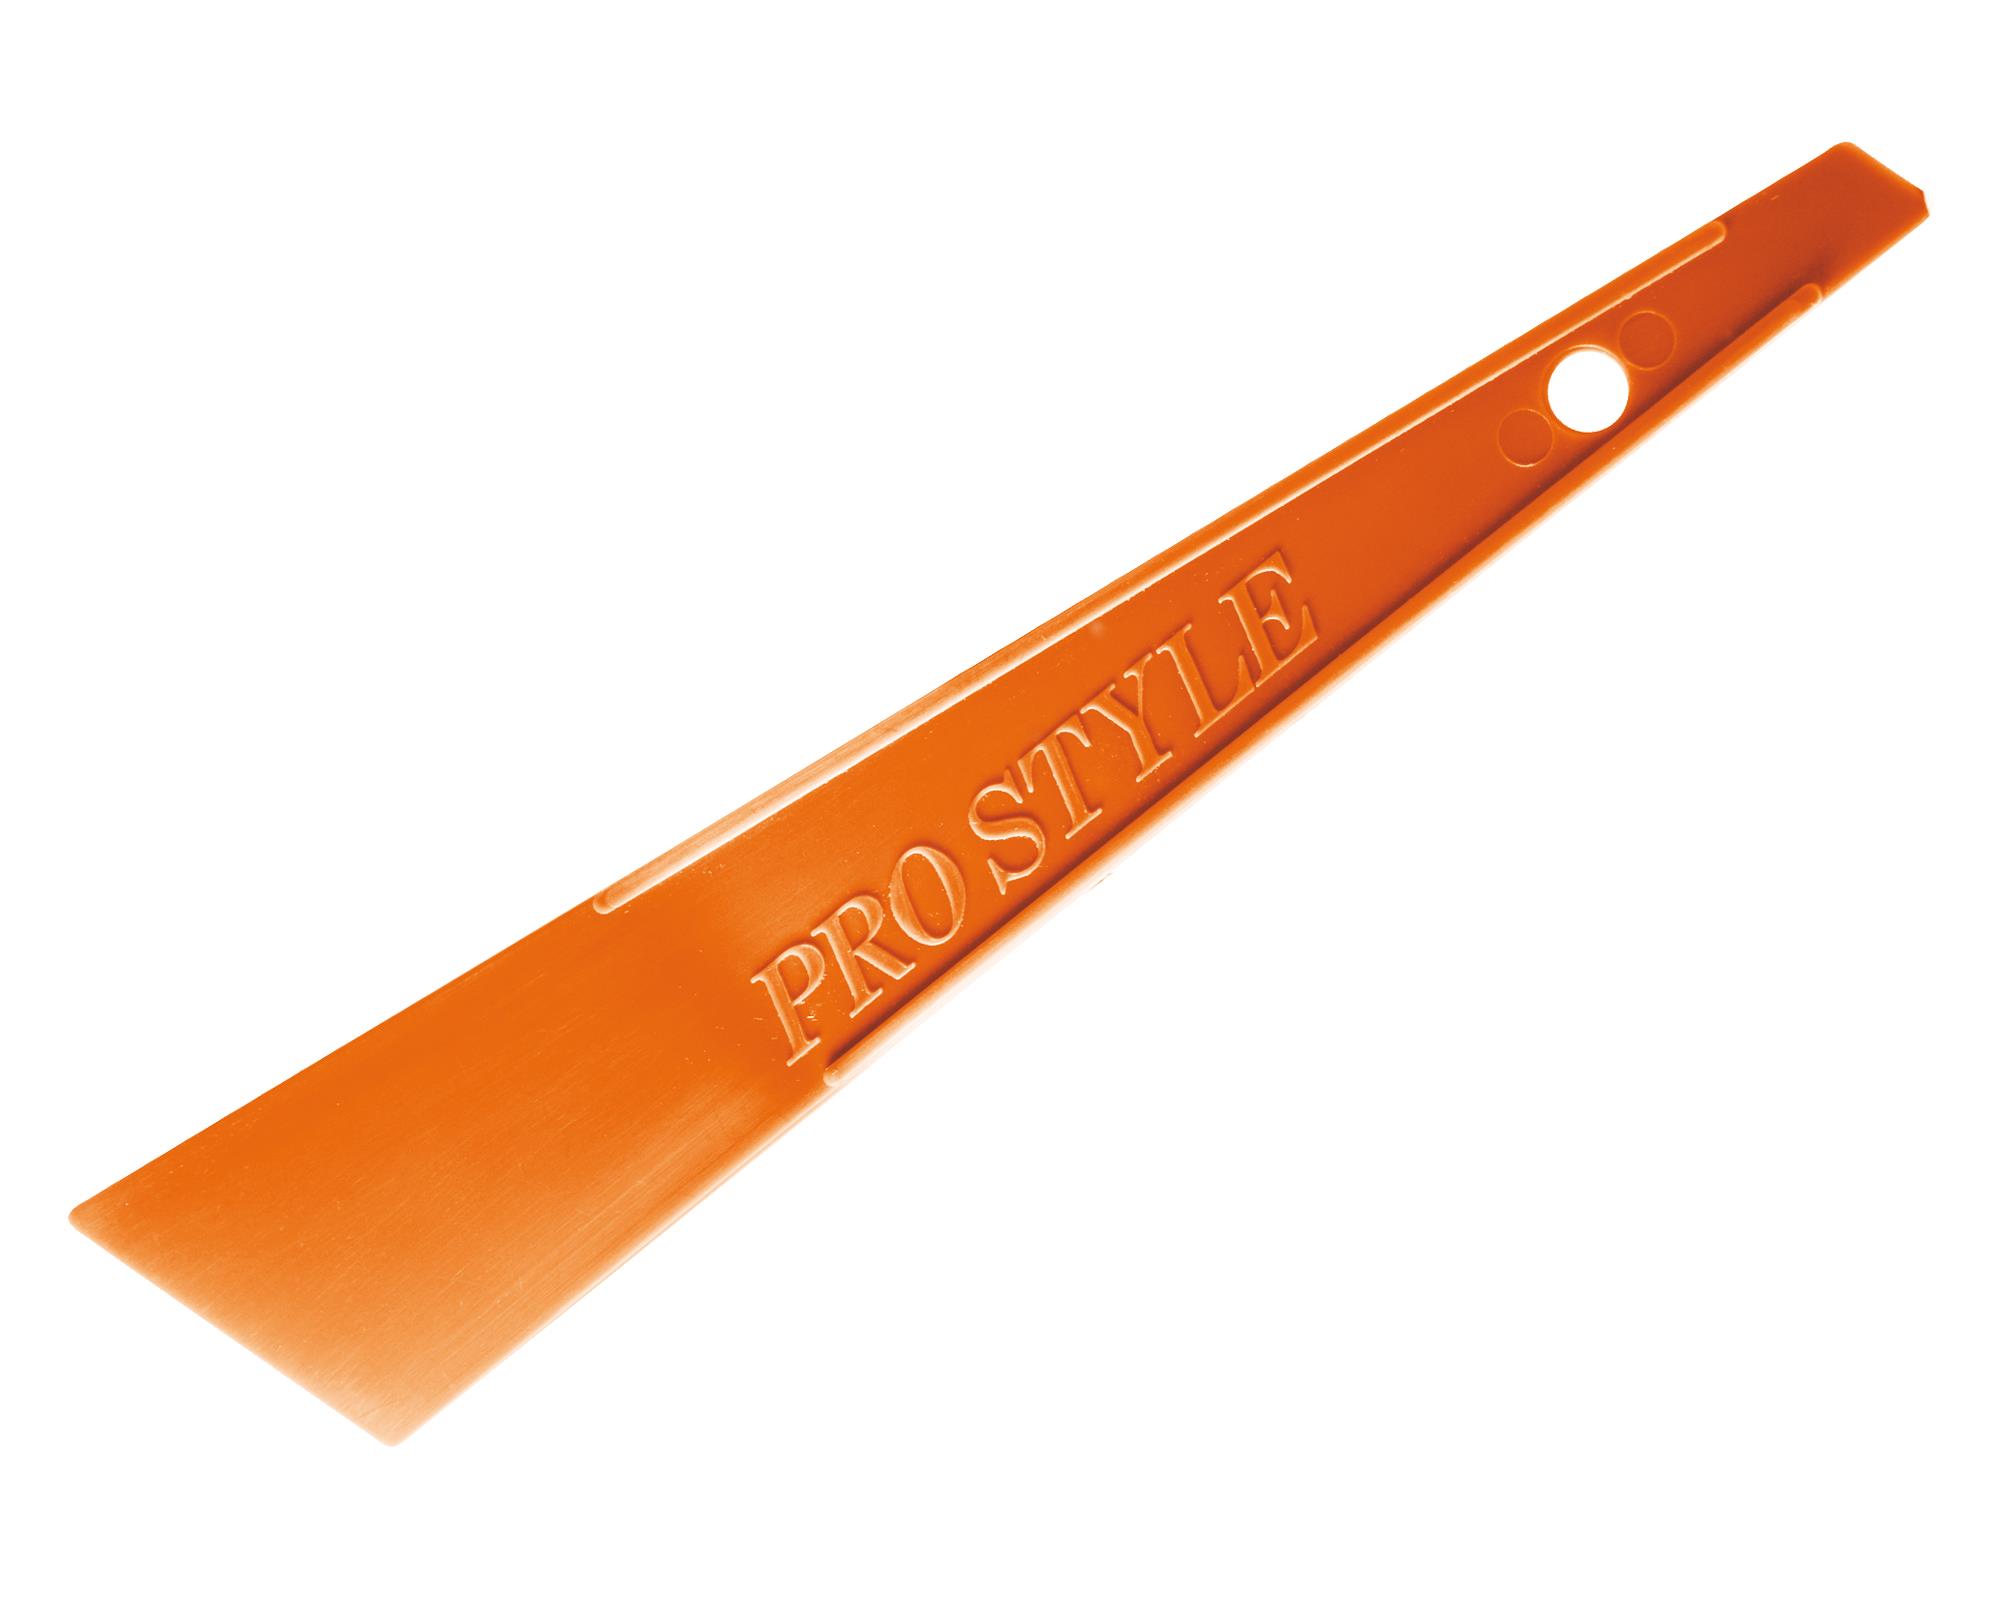 Pro-Style squeegee typ 4